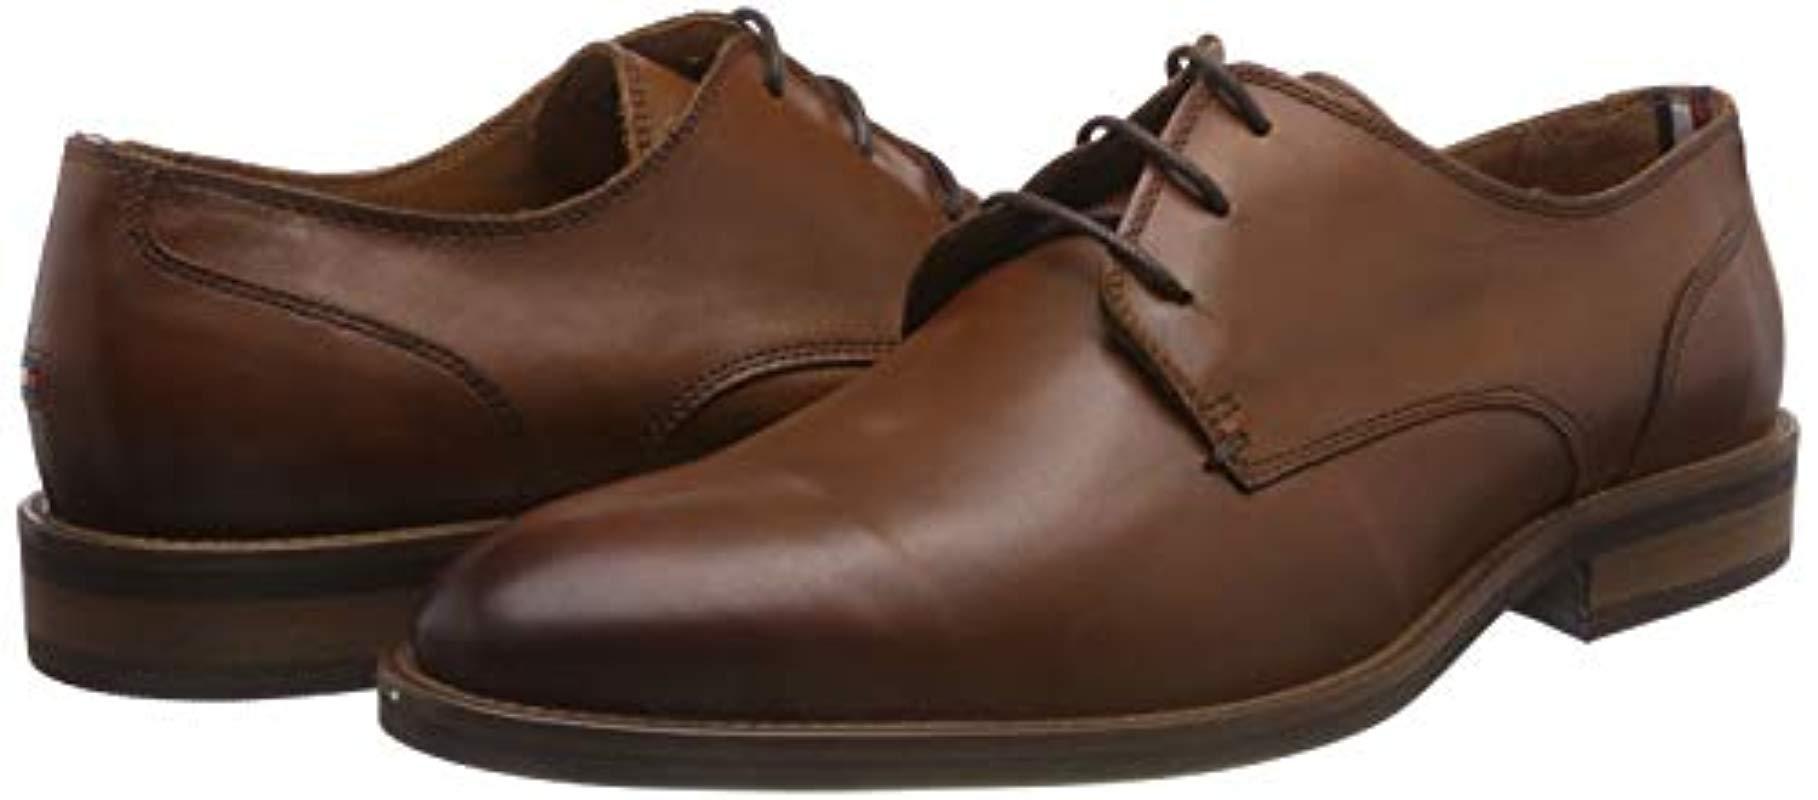 Tommy Hilfiger Essential Leather Lace Up Derby in Brown for Men - Lyst